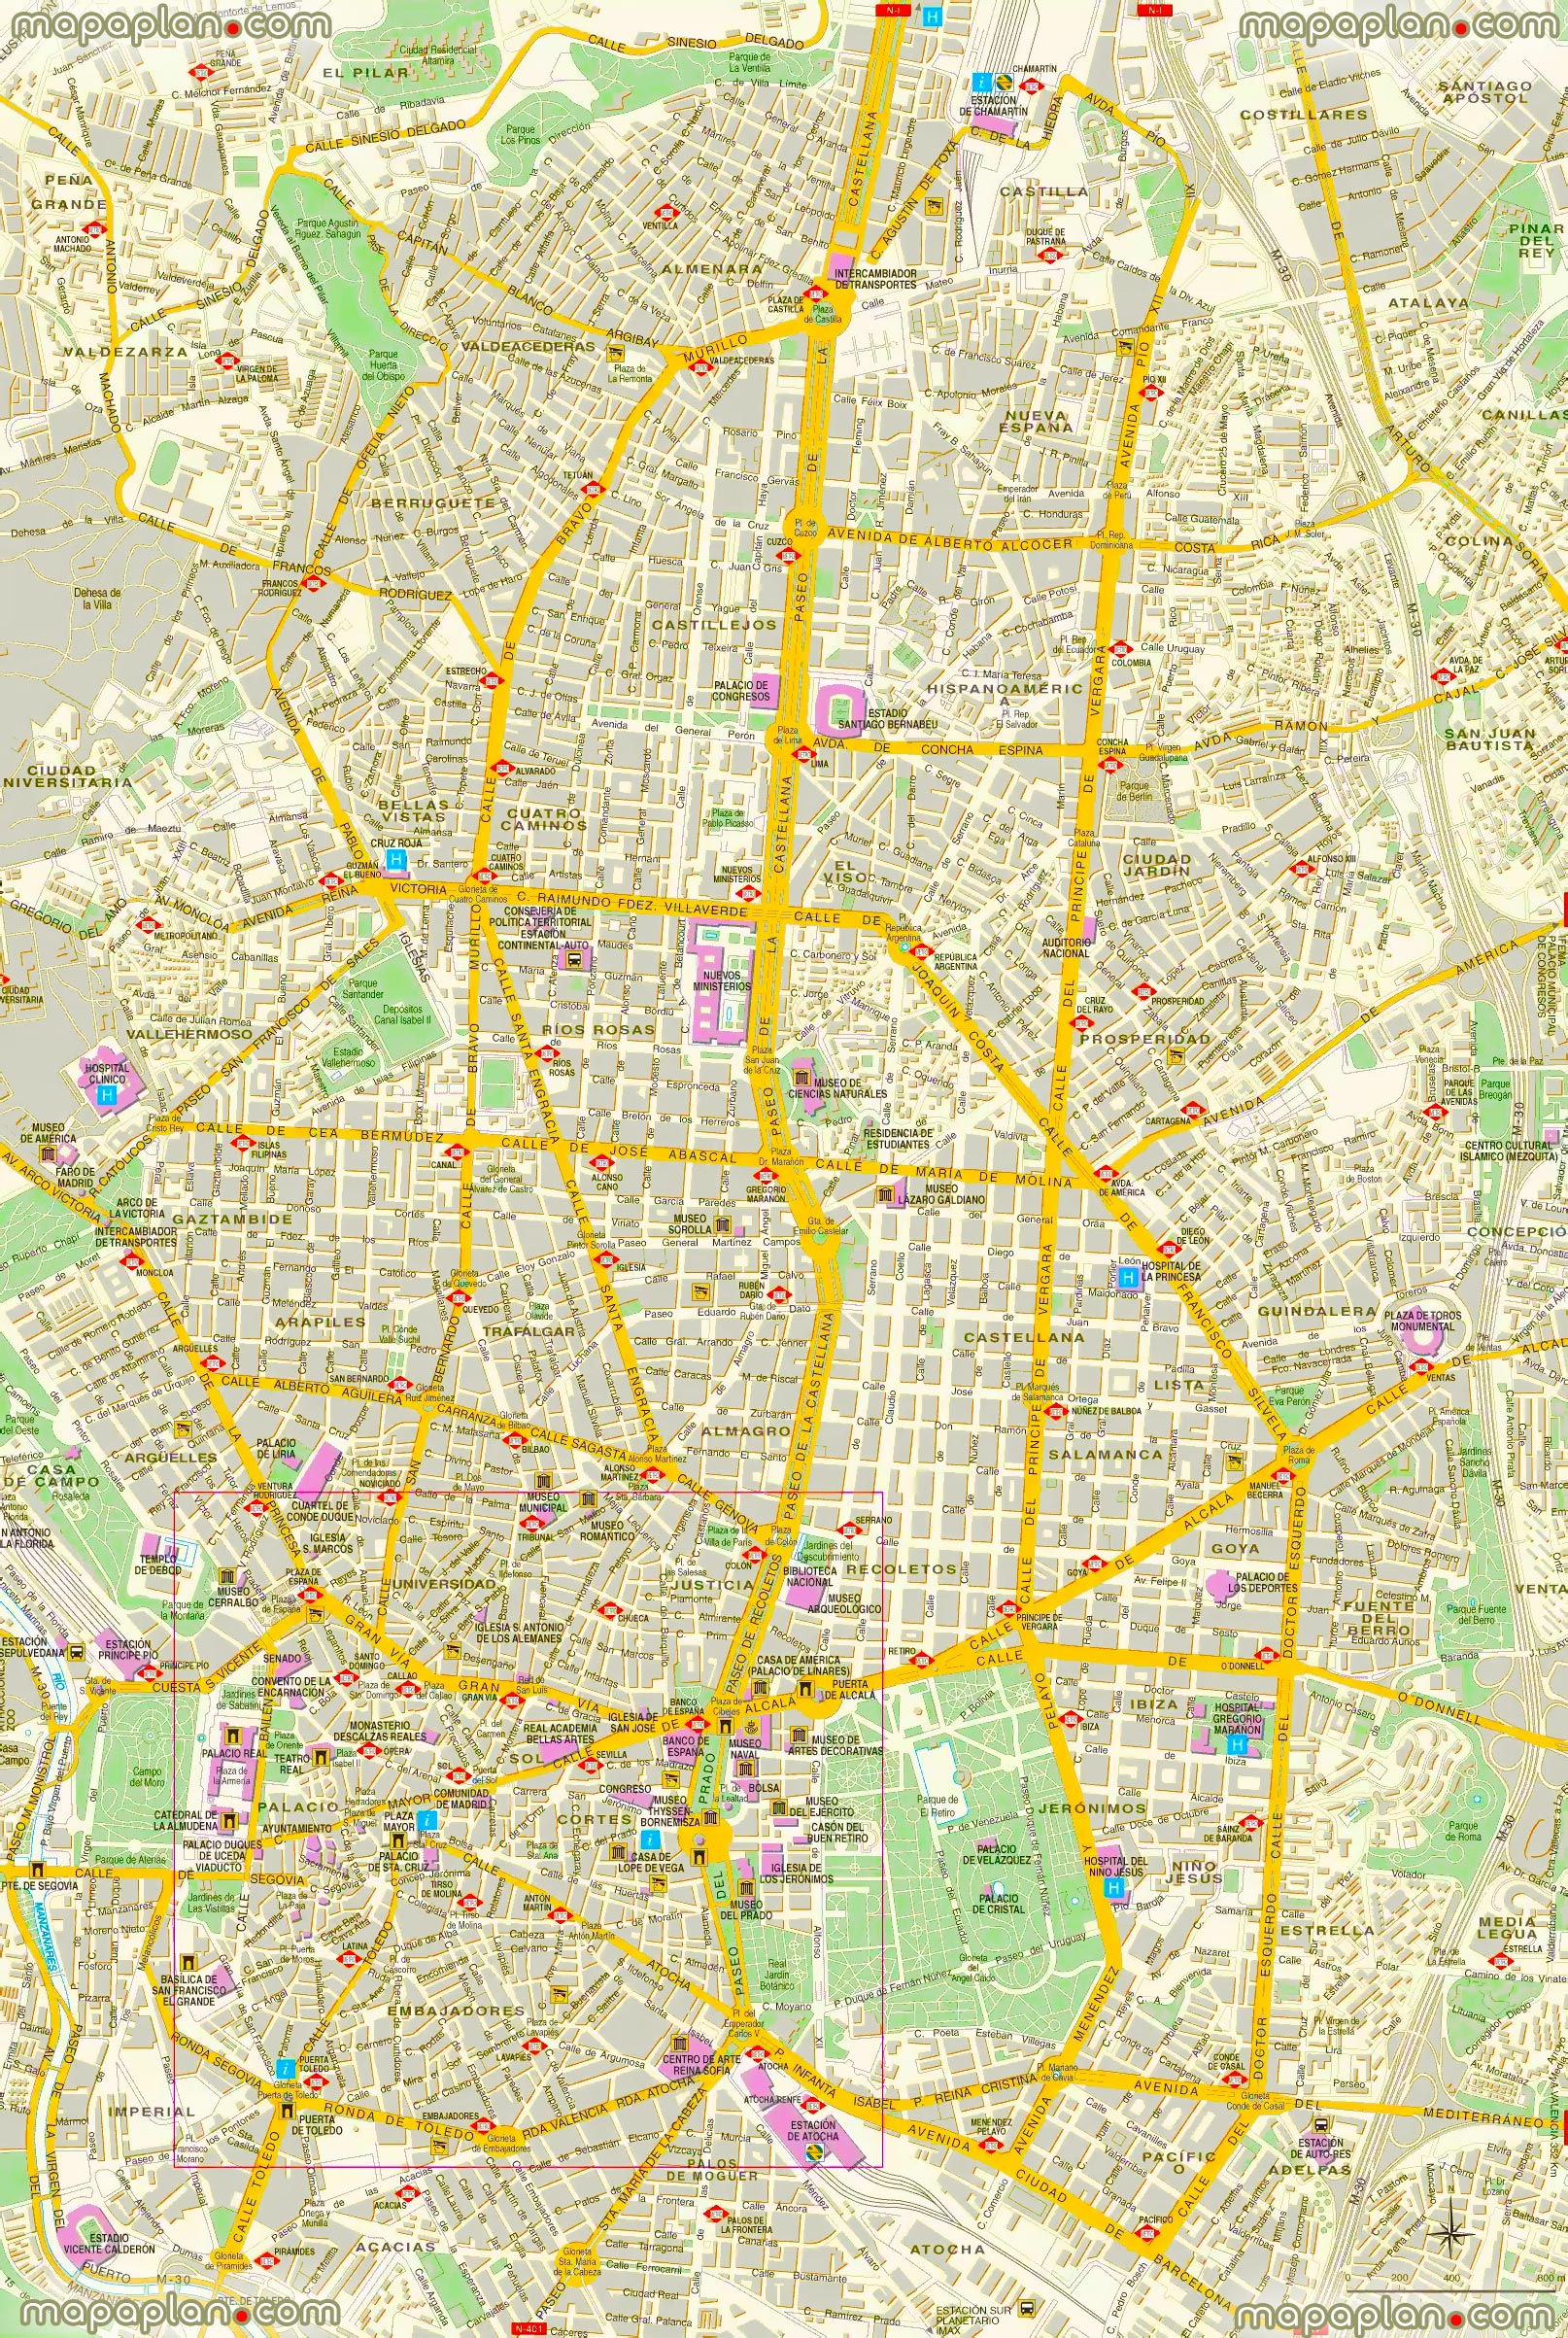 Madrid highlights detailed famous sites explore santiago bernabeu stadiums Madrid Top tourist attractions map